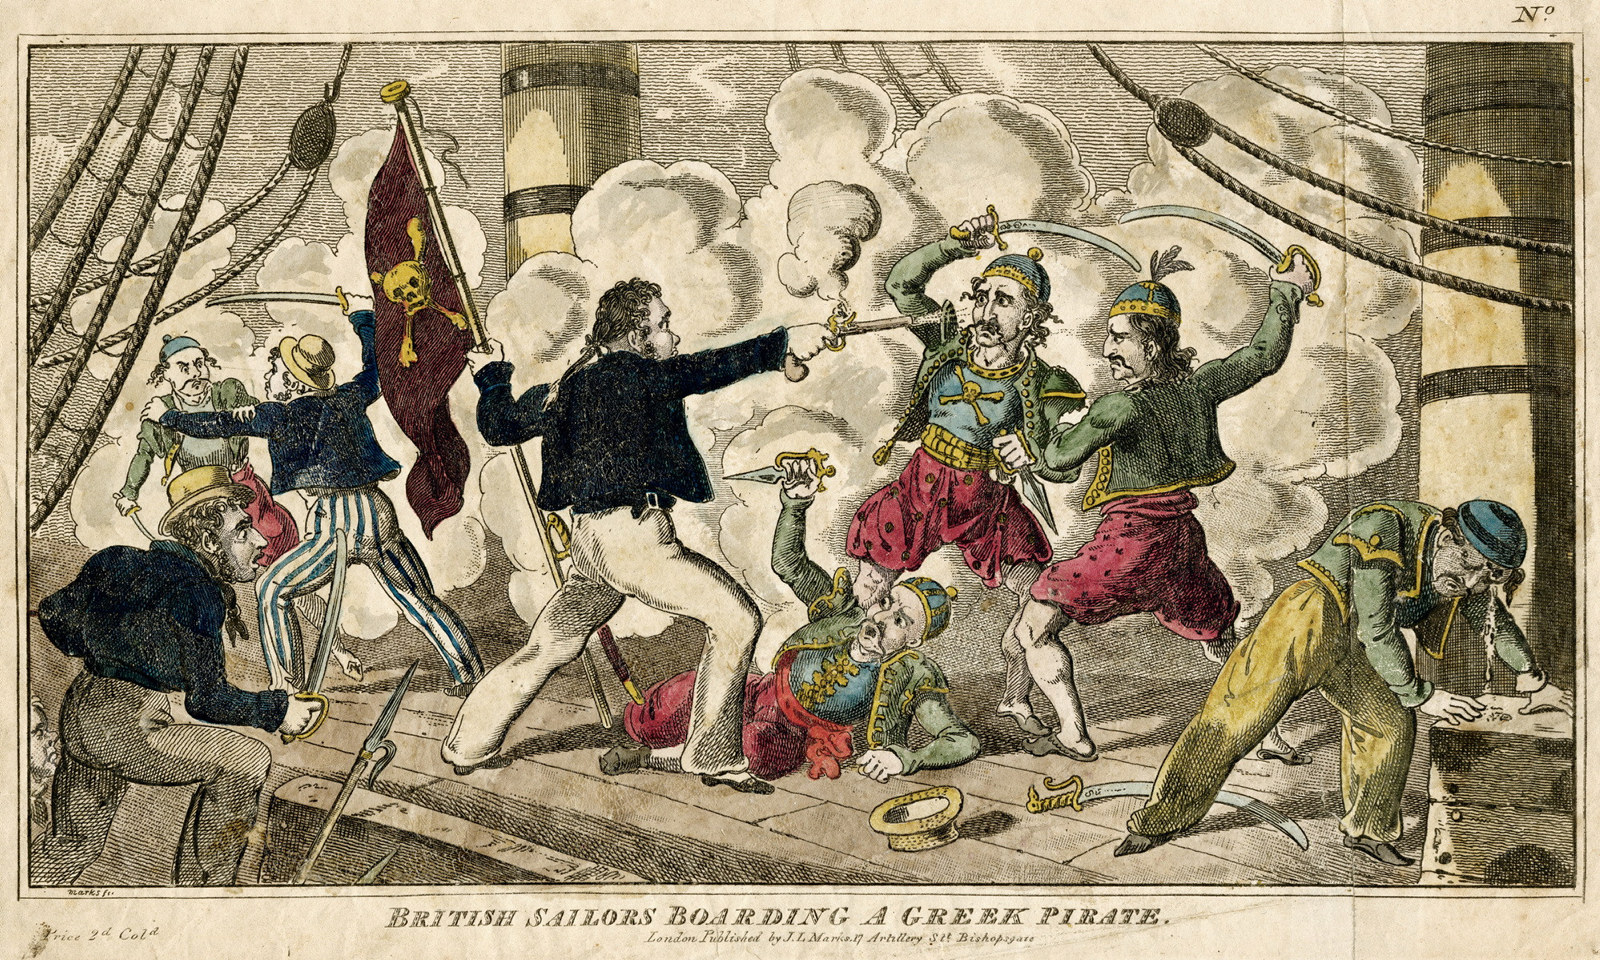 Coloured print depicting sailors fighting pirates on board ship.